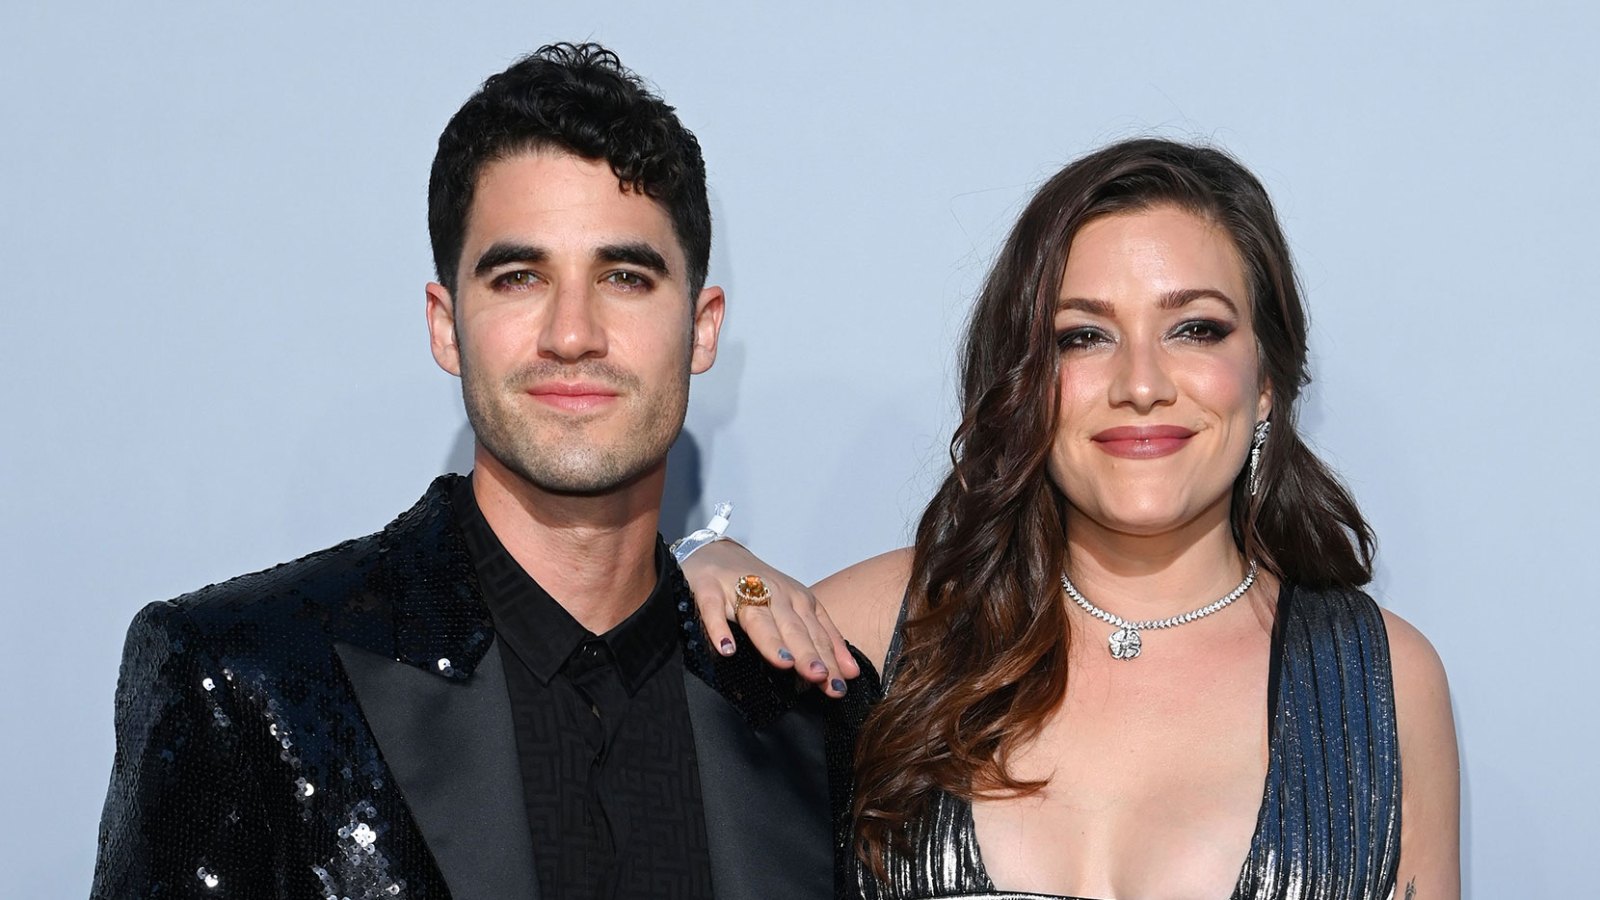 Glee’s Darren Criss and Wife Mia Swier Welcome Their 1st Baby